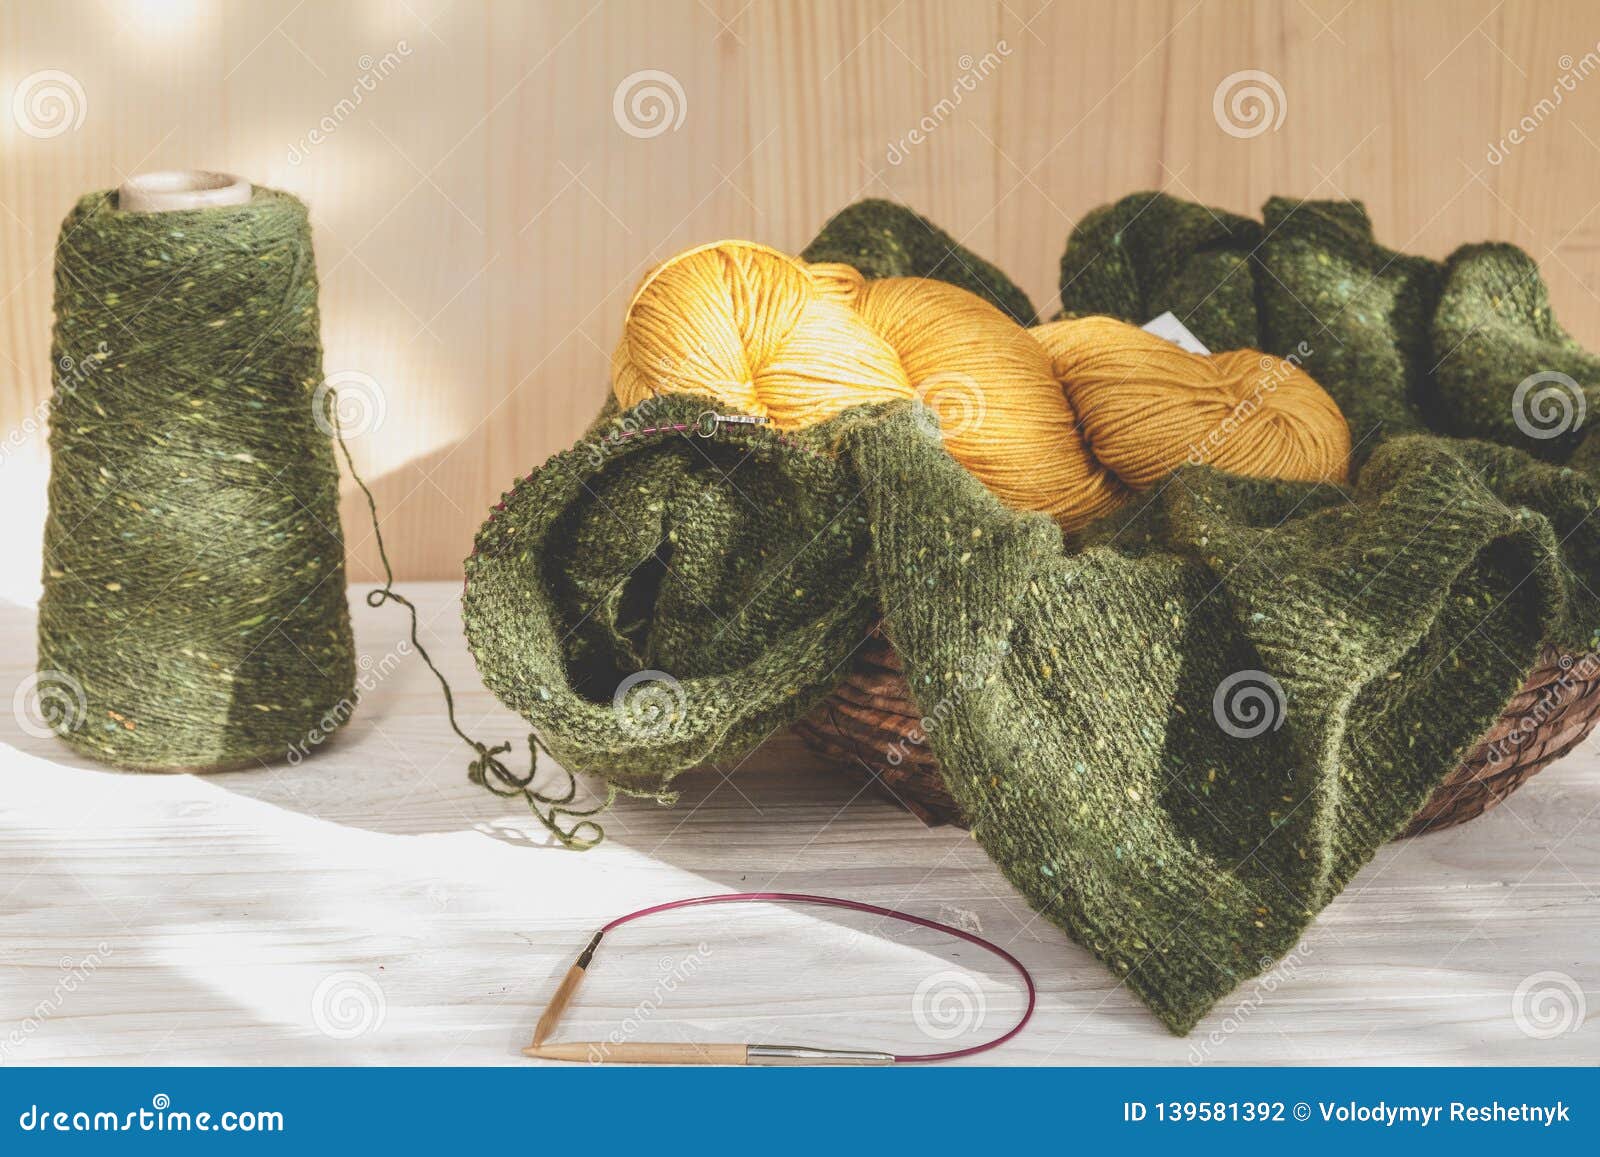 Wool Green and Yellow Yarn in Coils with Knitting Needles in Wicker ...